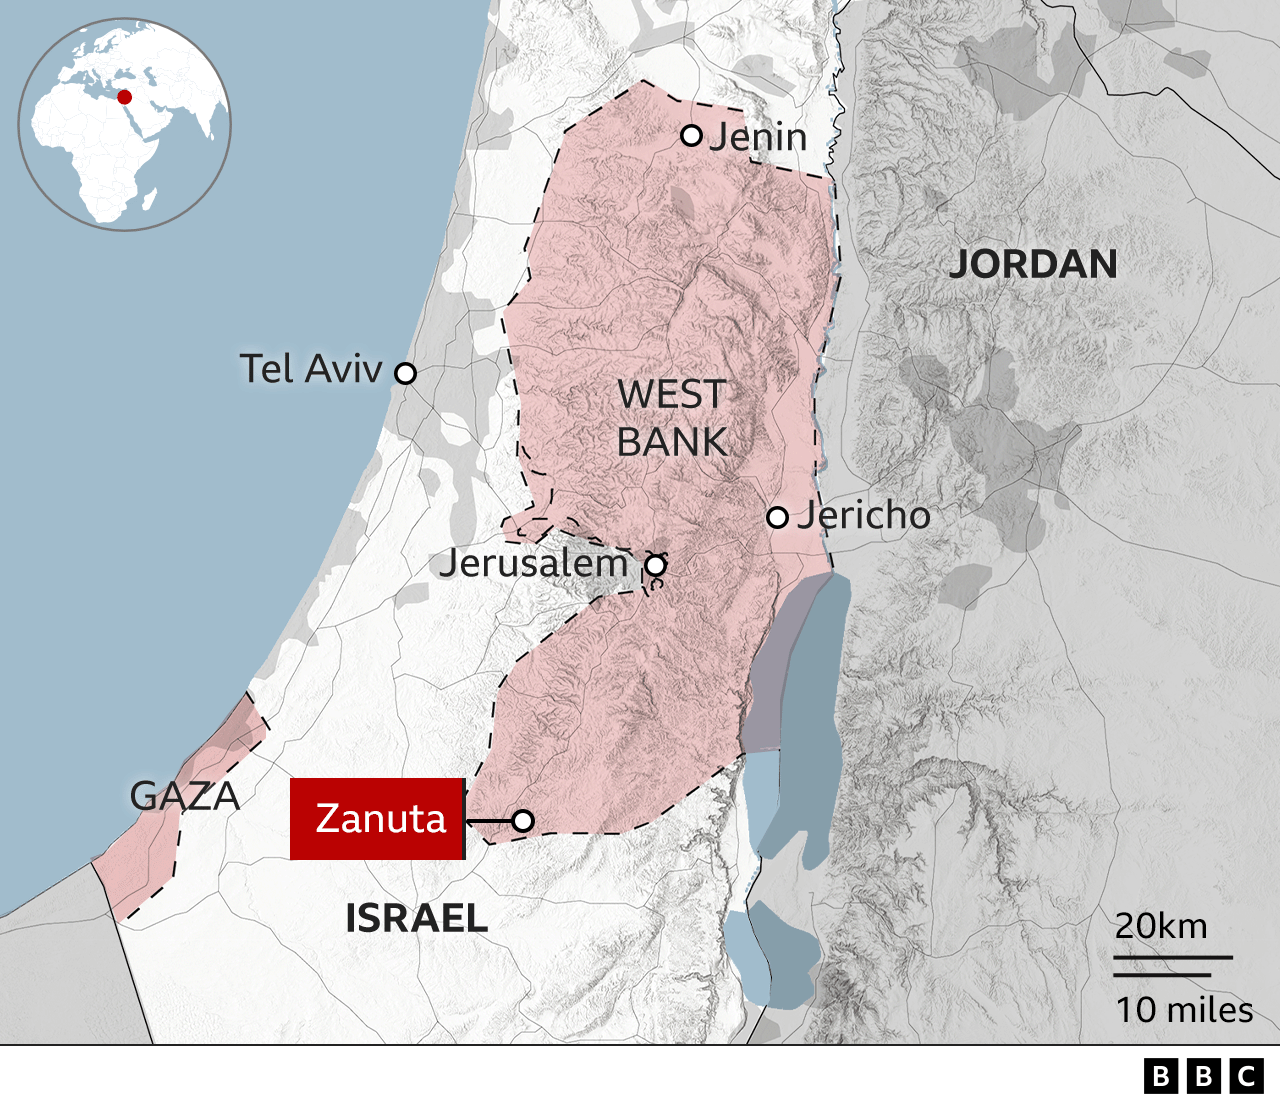 Map showing location of Zanuta in the occupied West Bank